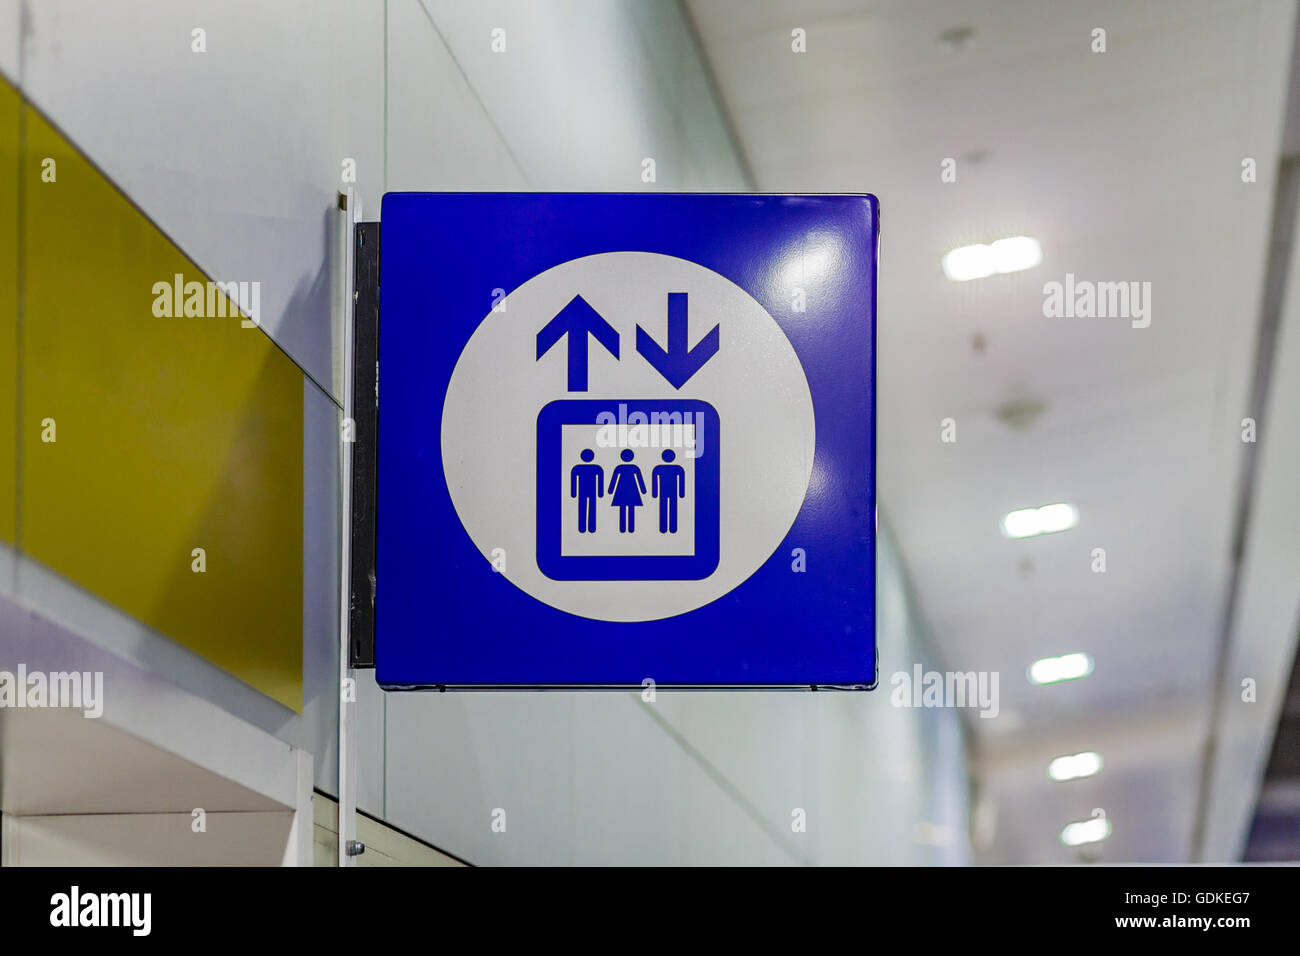 generic blue sign for elevator Stock Photo